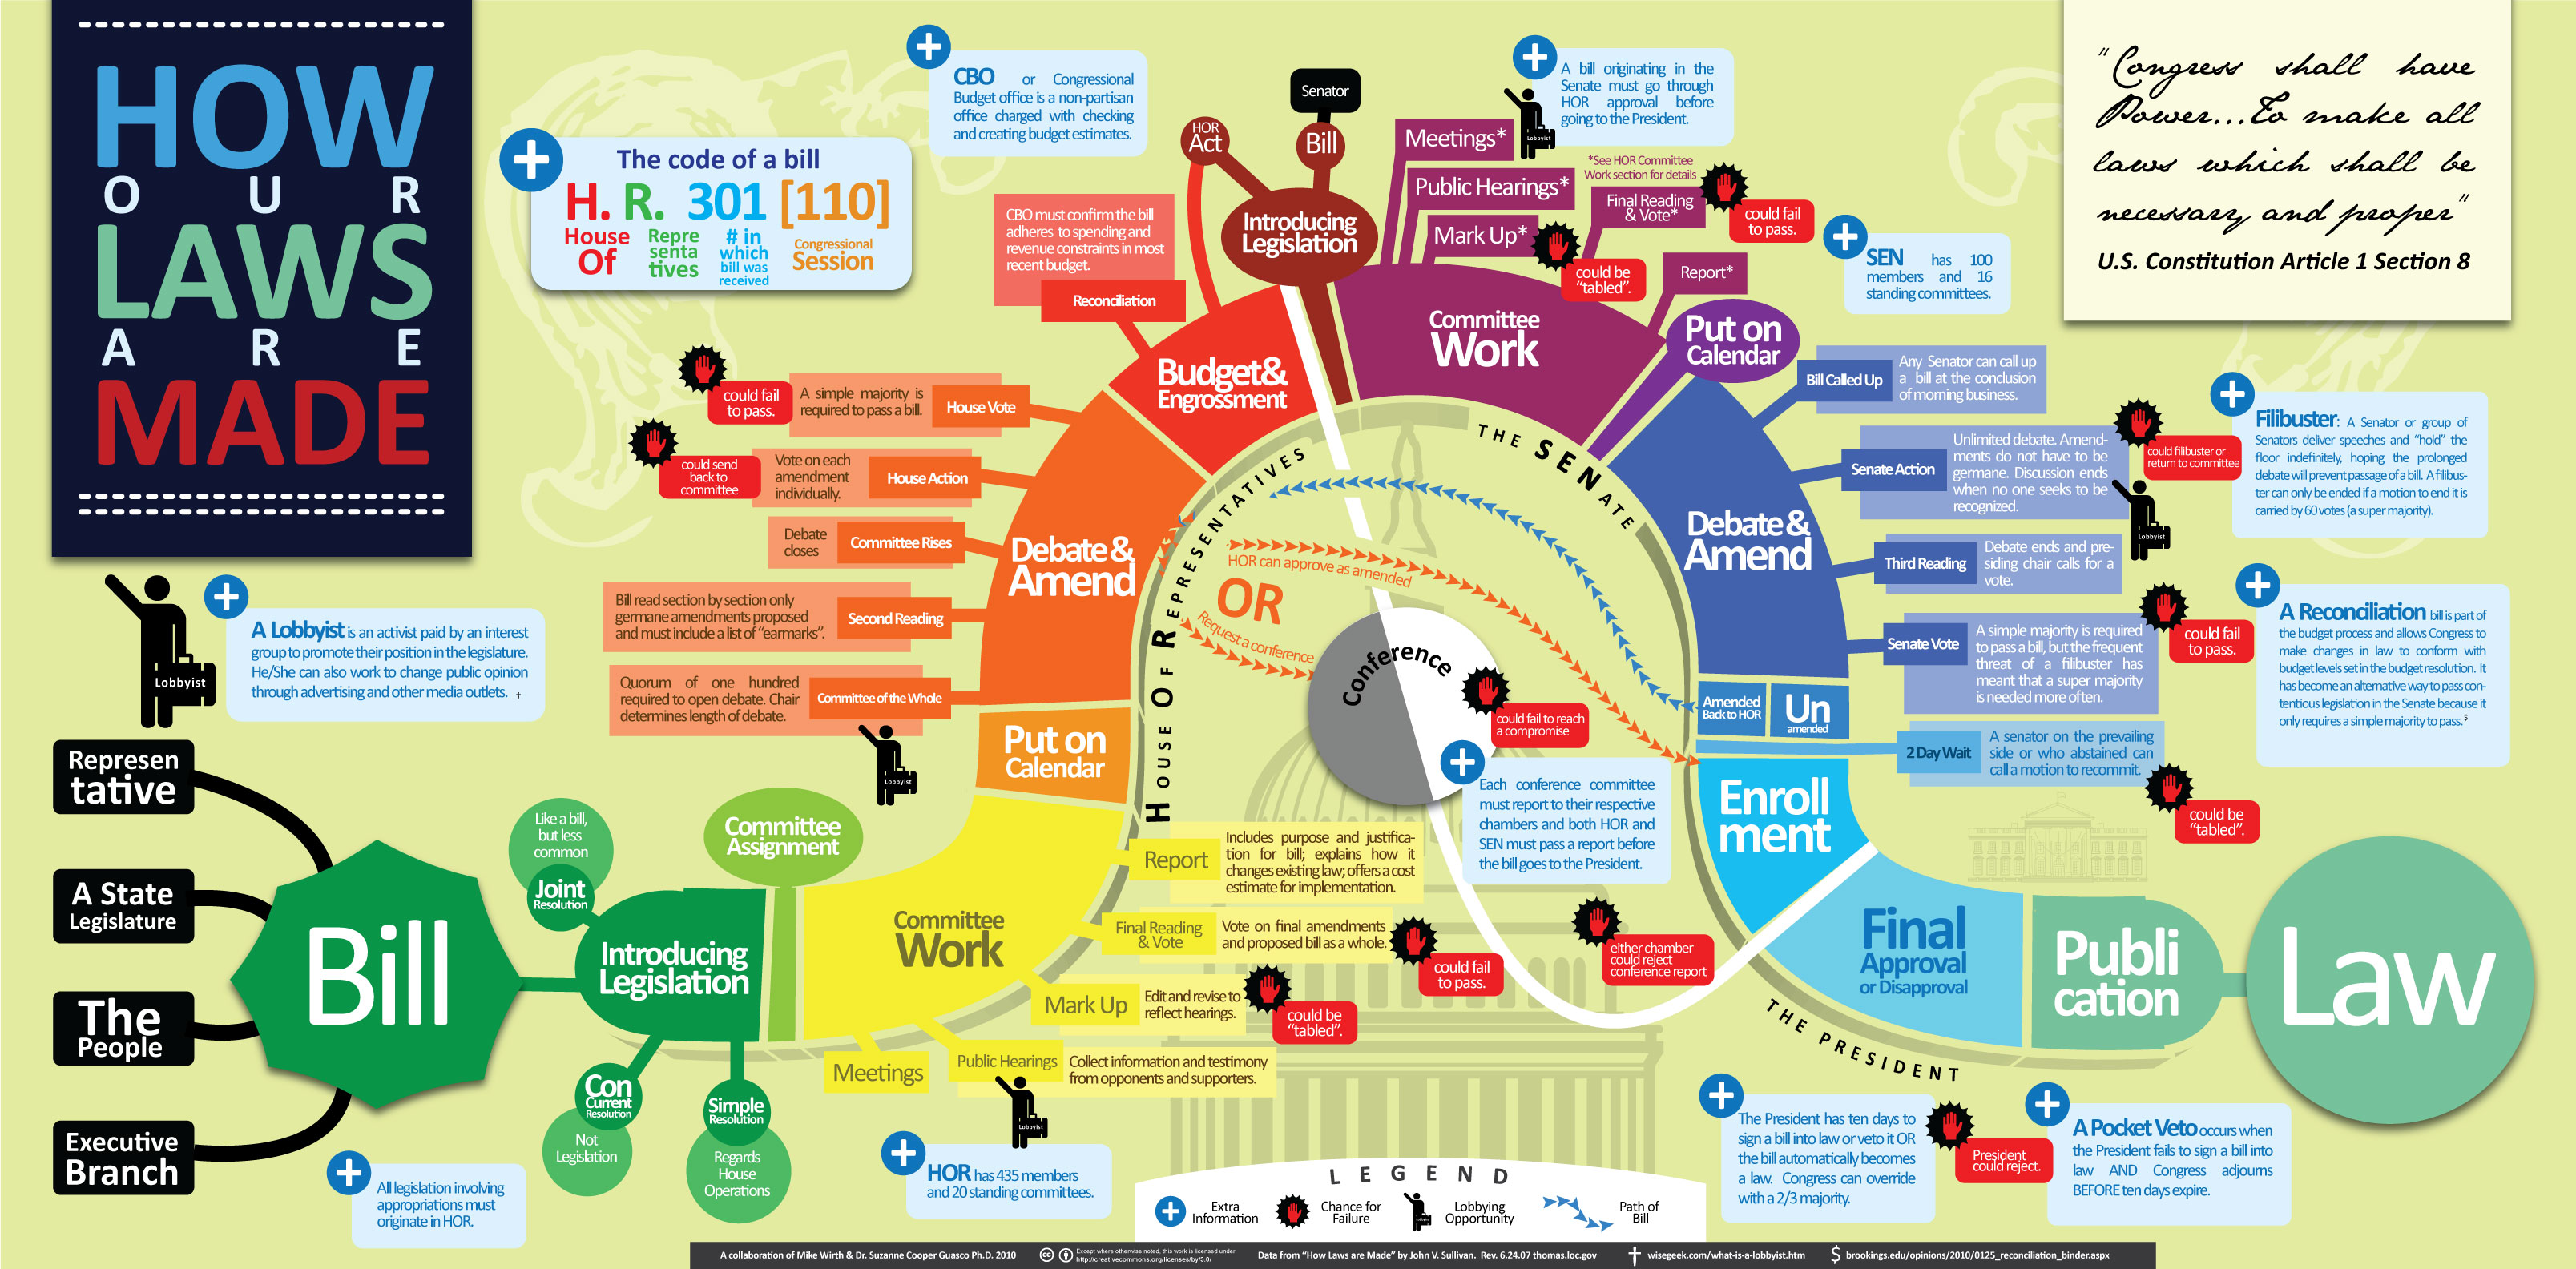 "How laws are made" infographic depicting the steps of a bill becoming a law in the United States